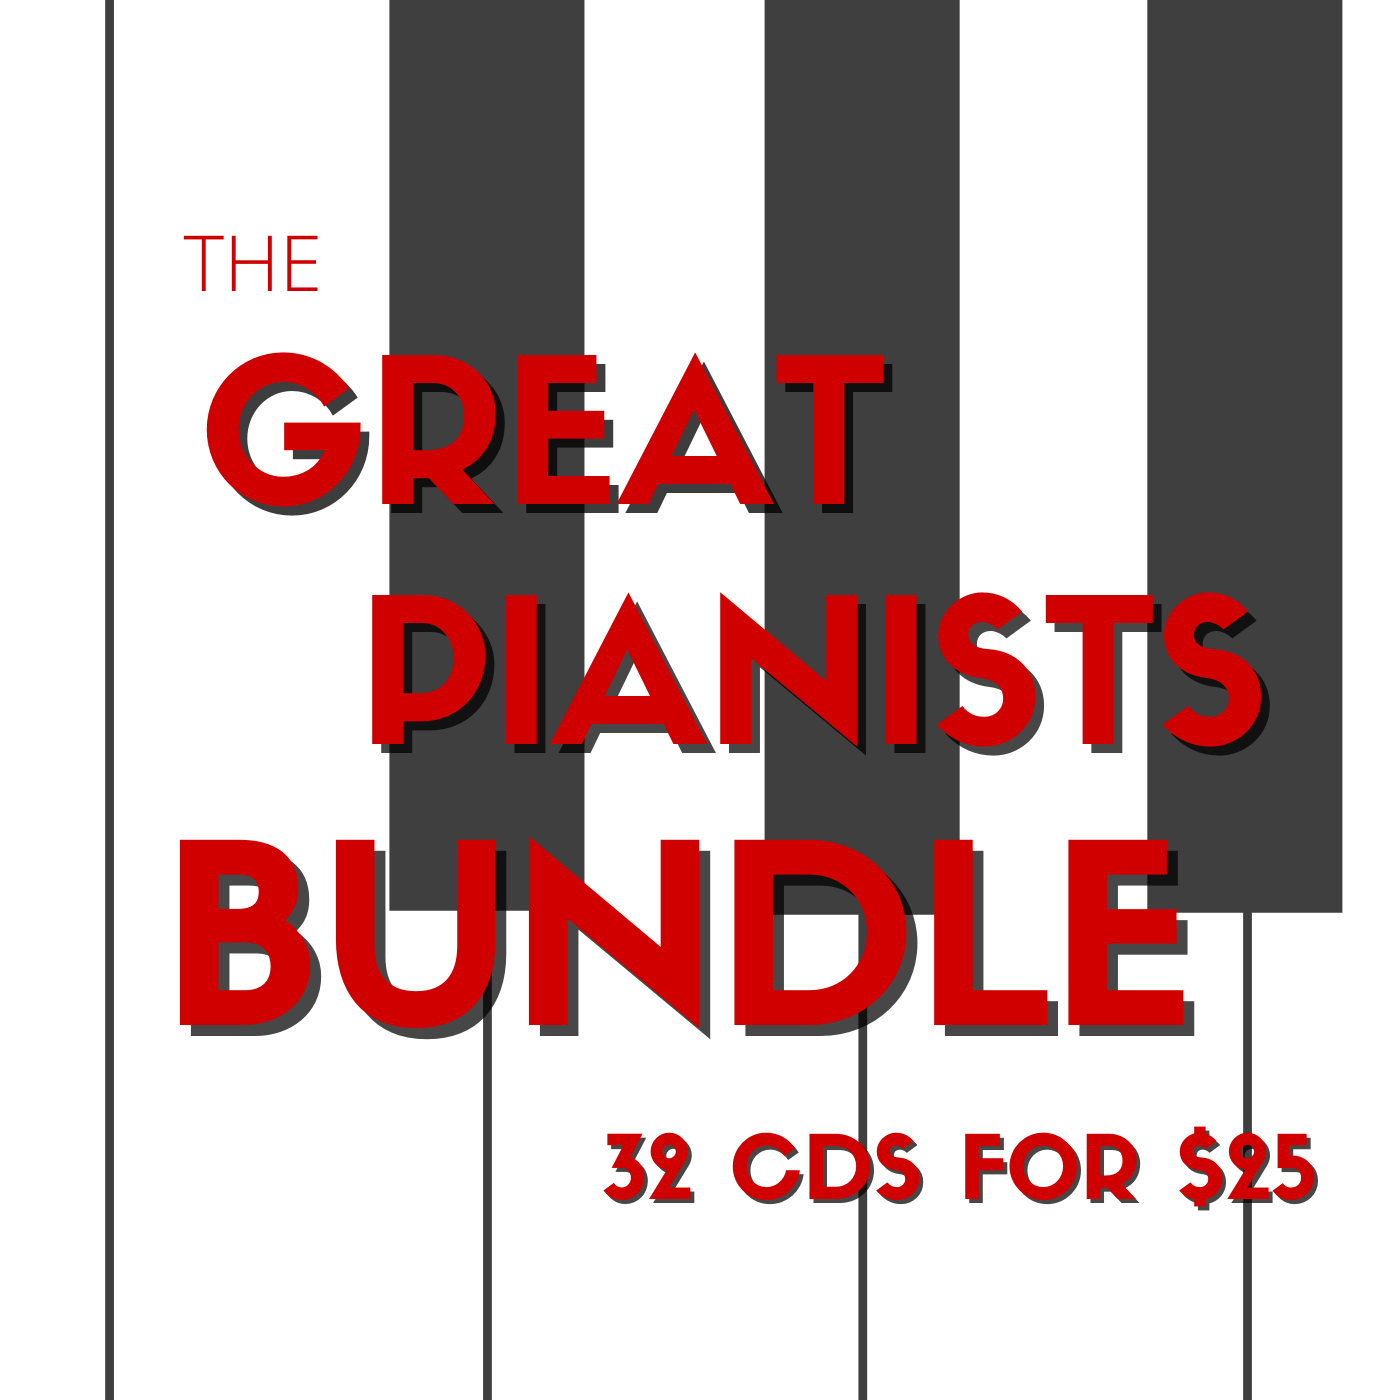 THE GREAT PIANISTS BUNDLE (32 CDS FOR $25)